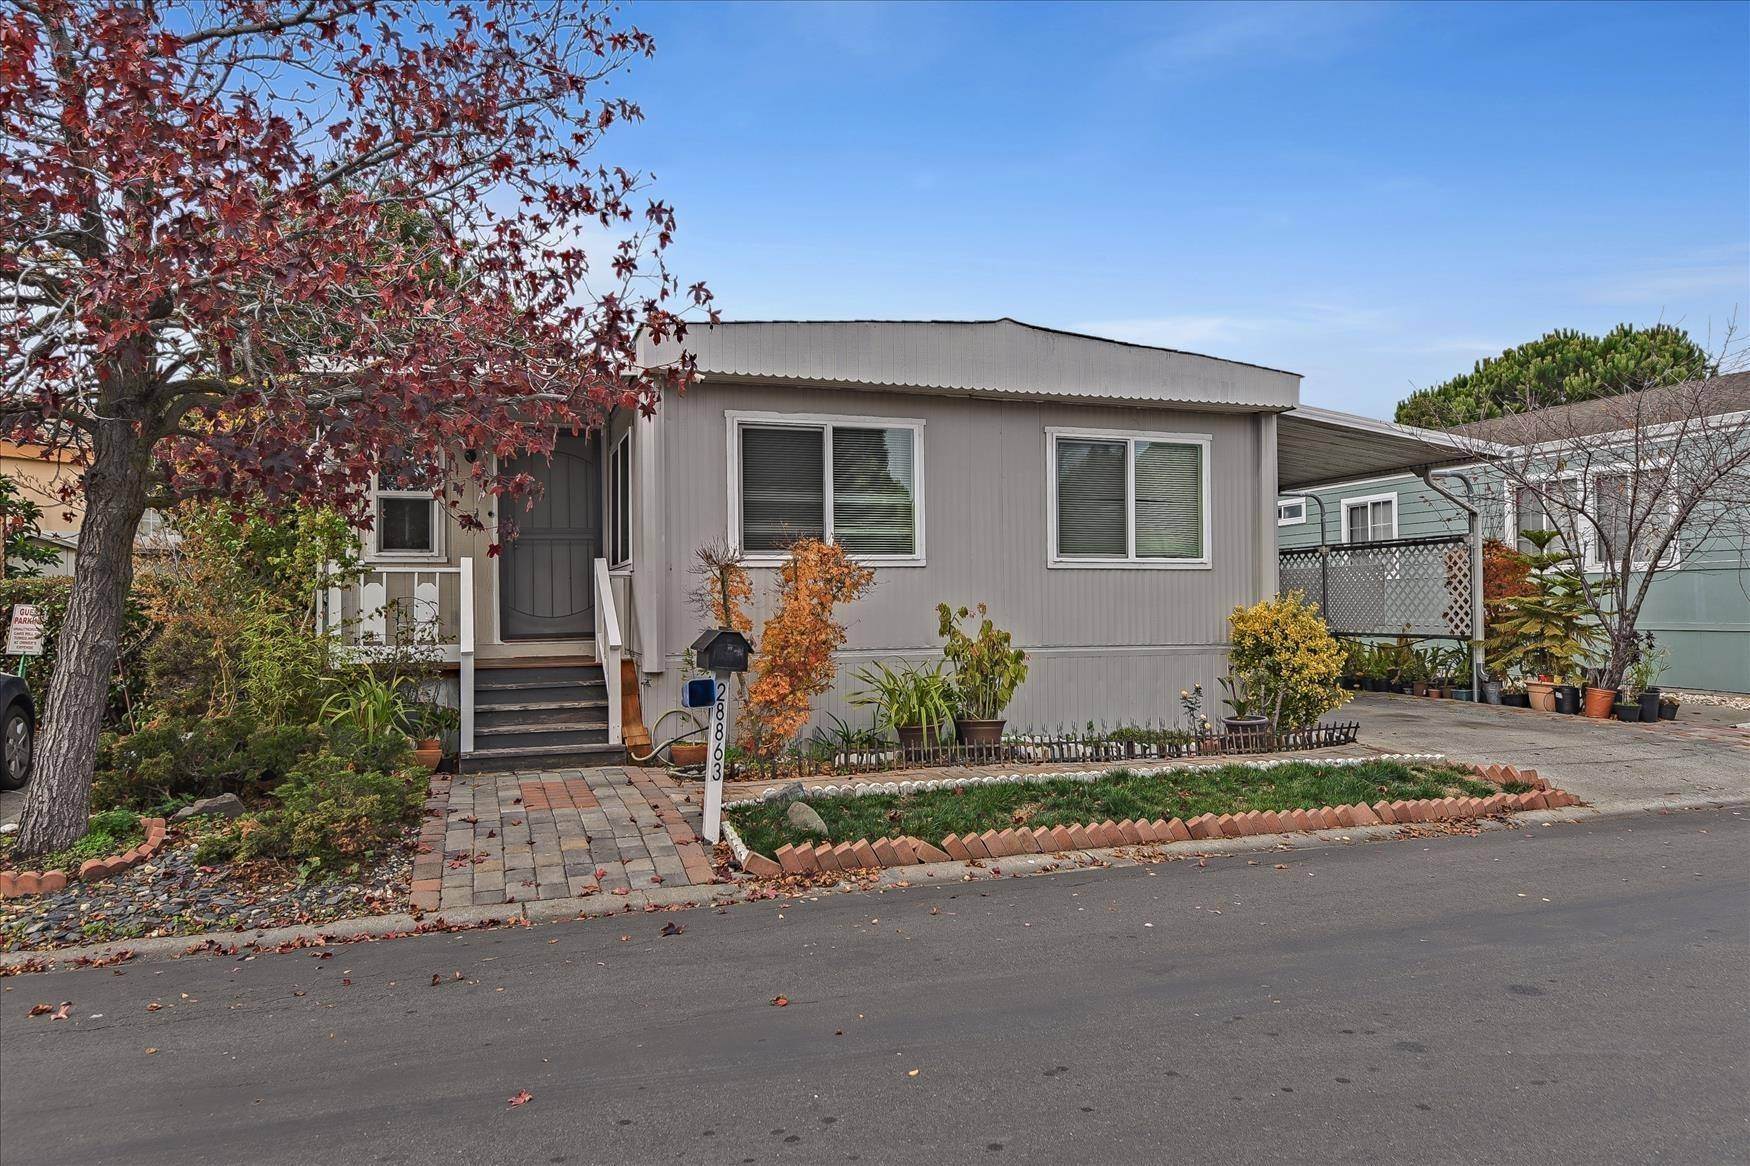 3. Mobile Home for Sale at Hayward, CA 94544